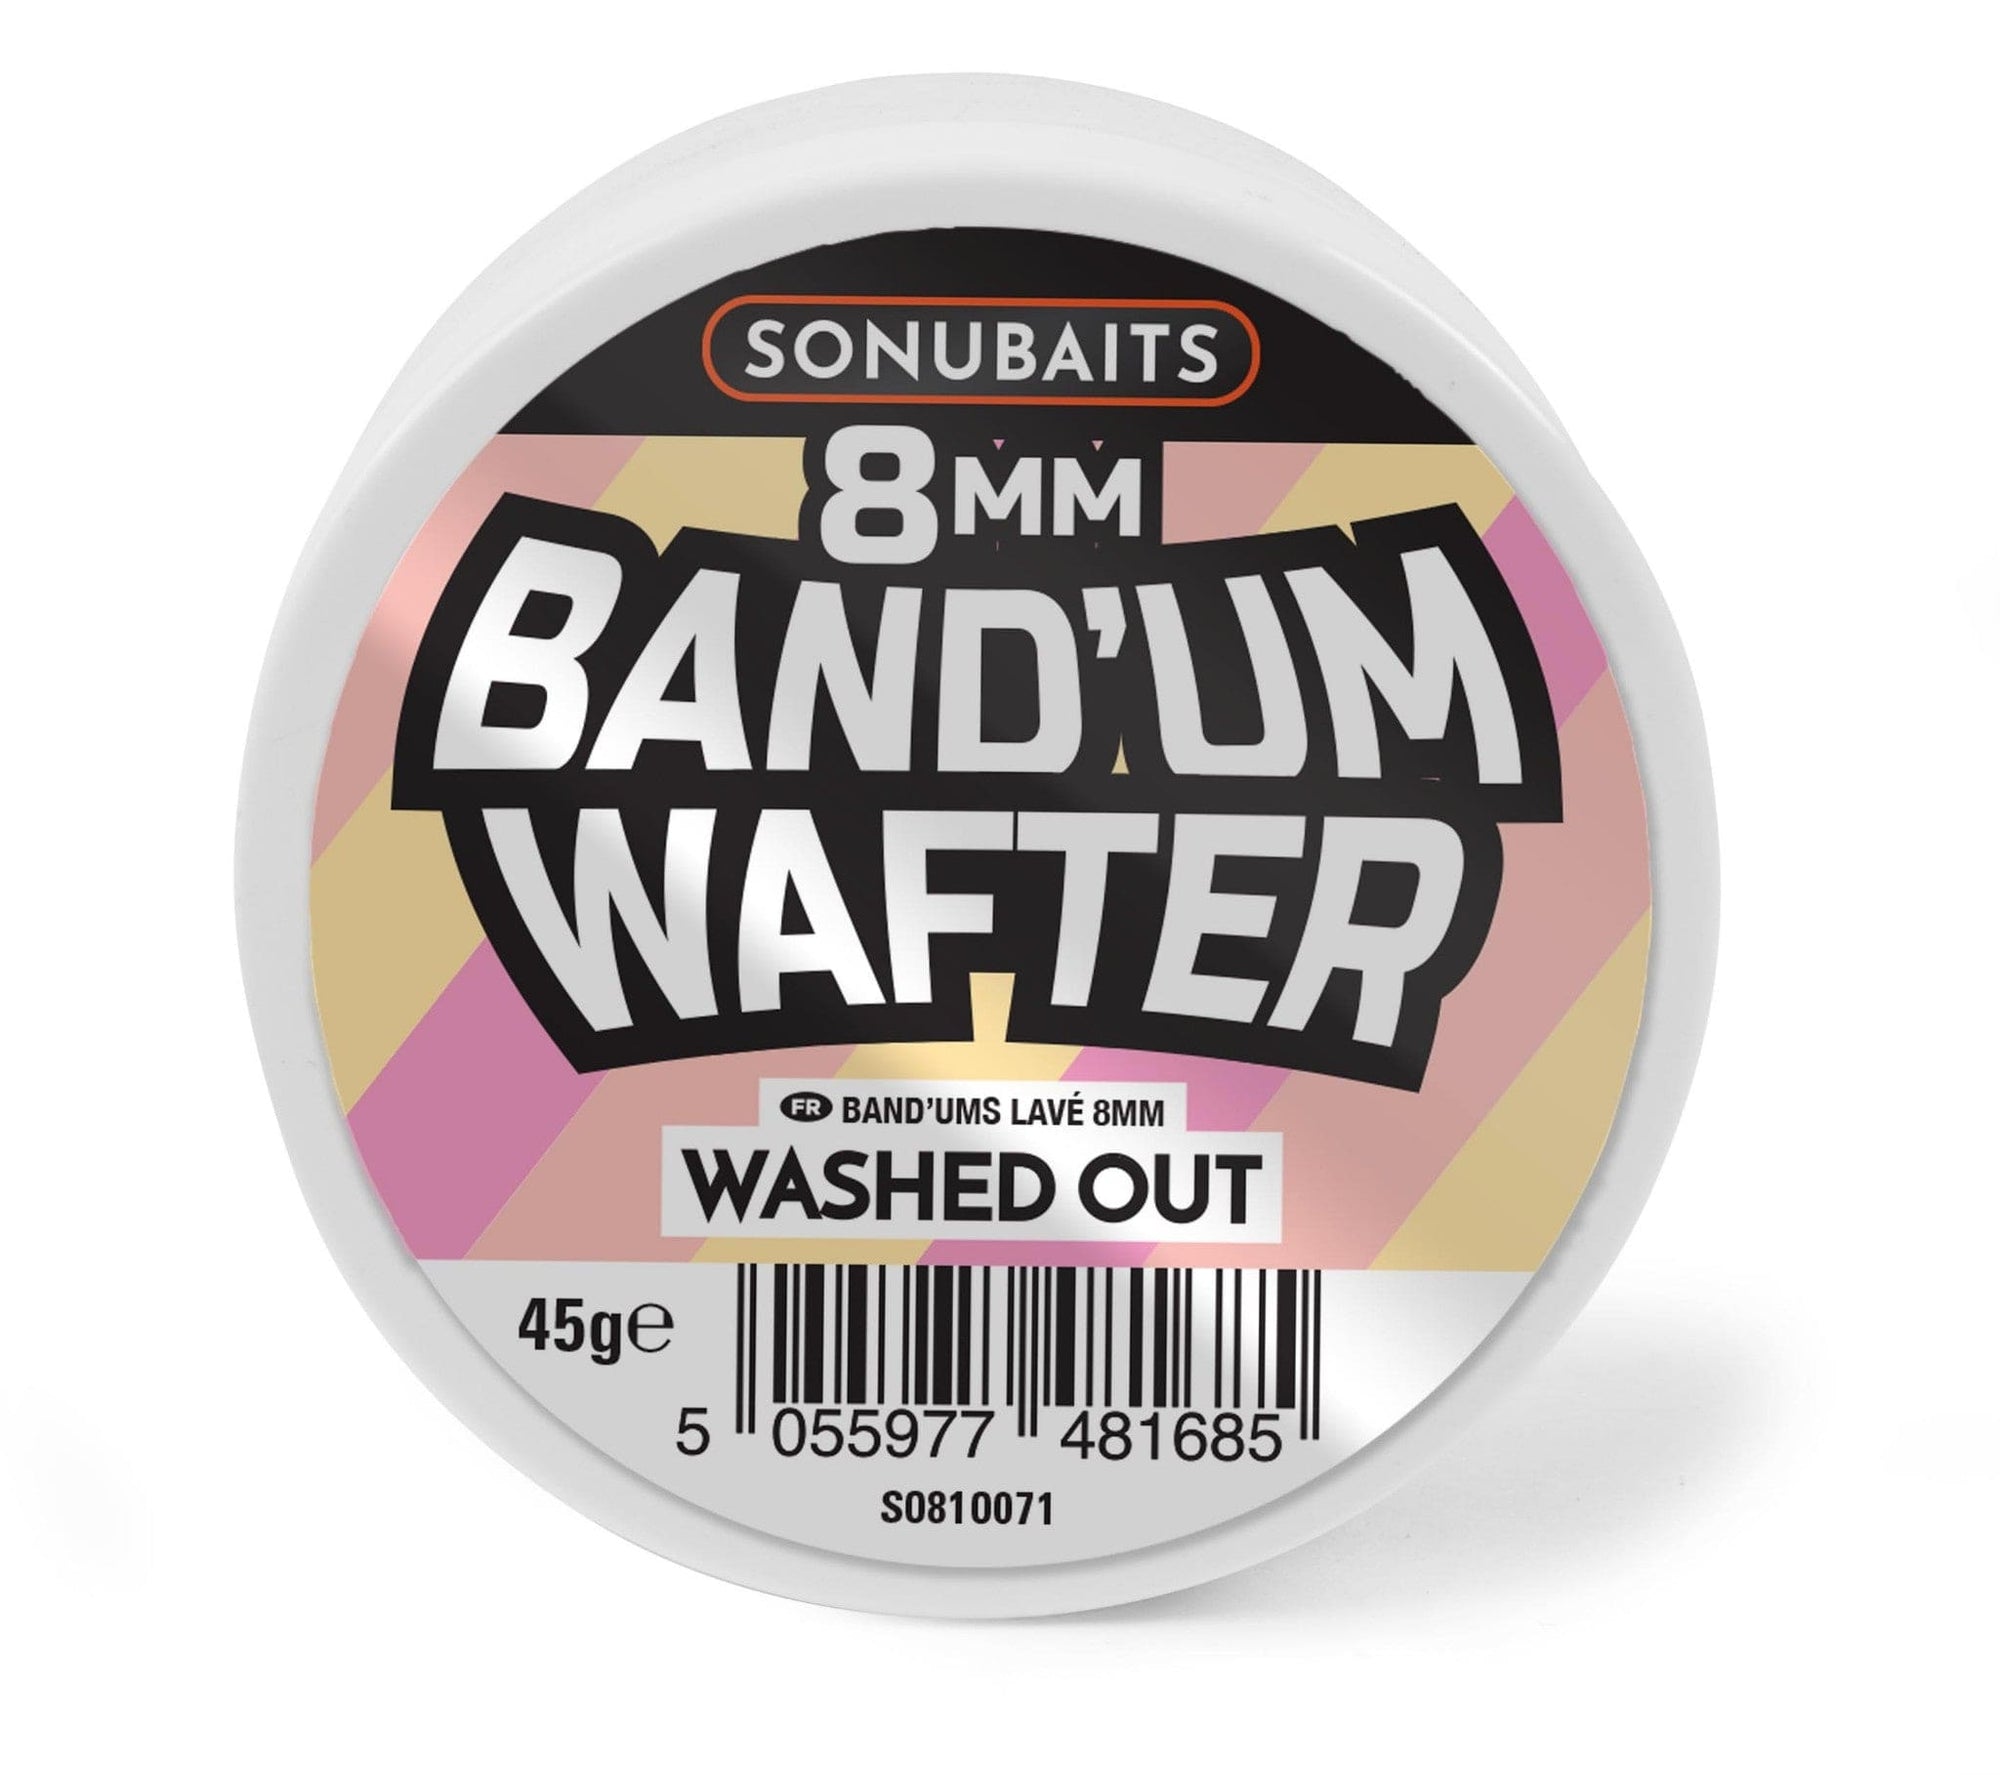 Sonubaits Band'um Wafters - Washed Out 8mm.